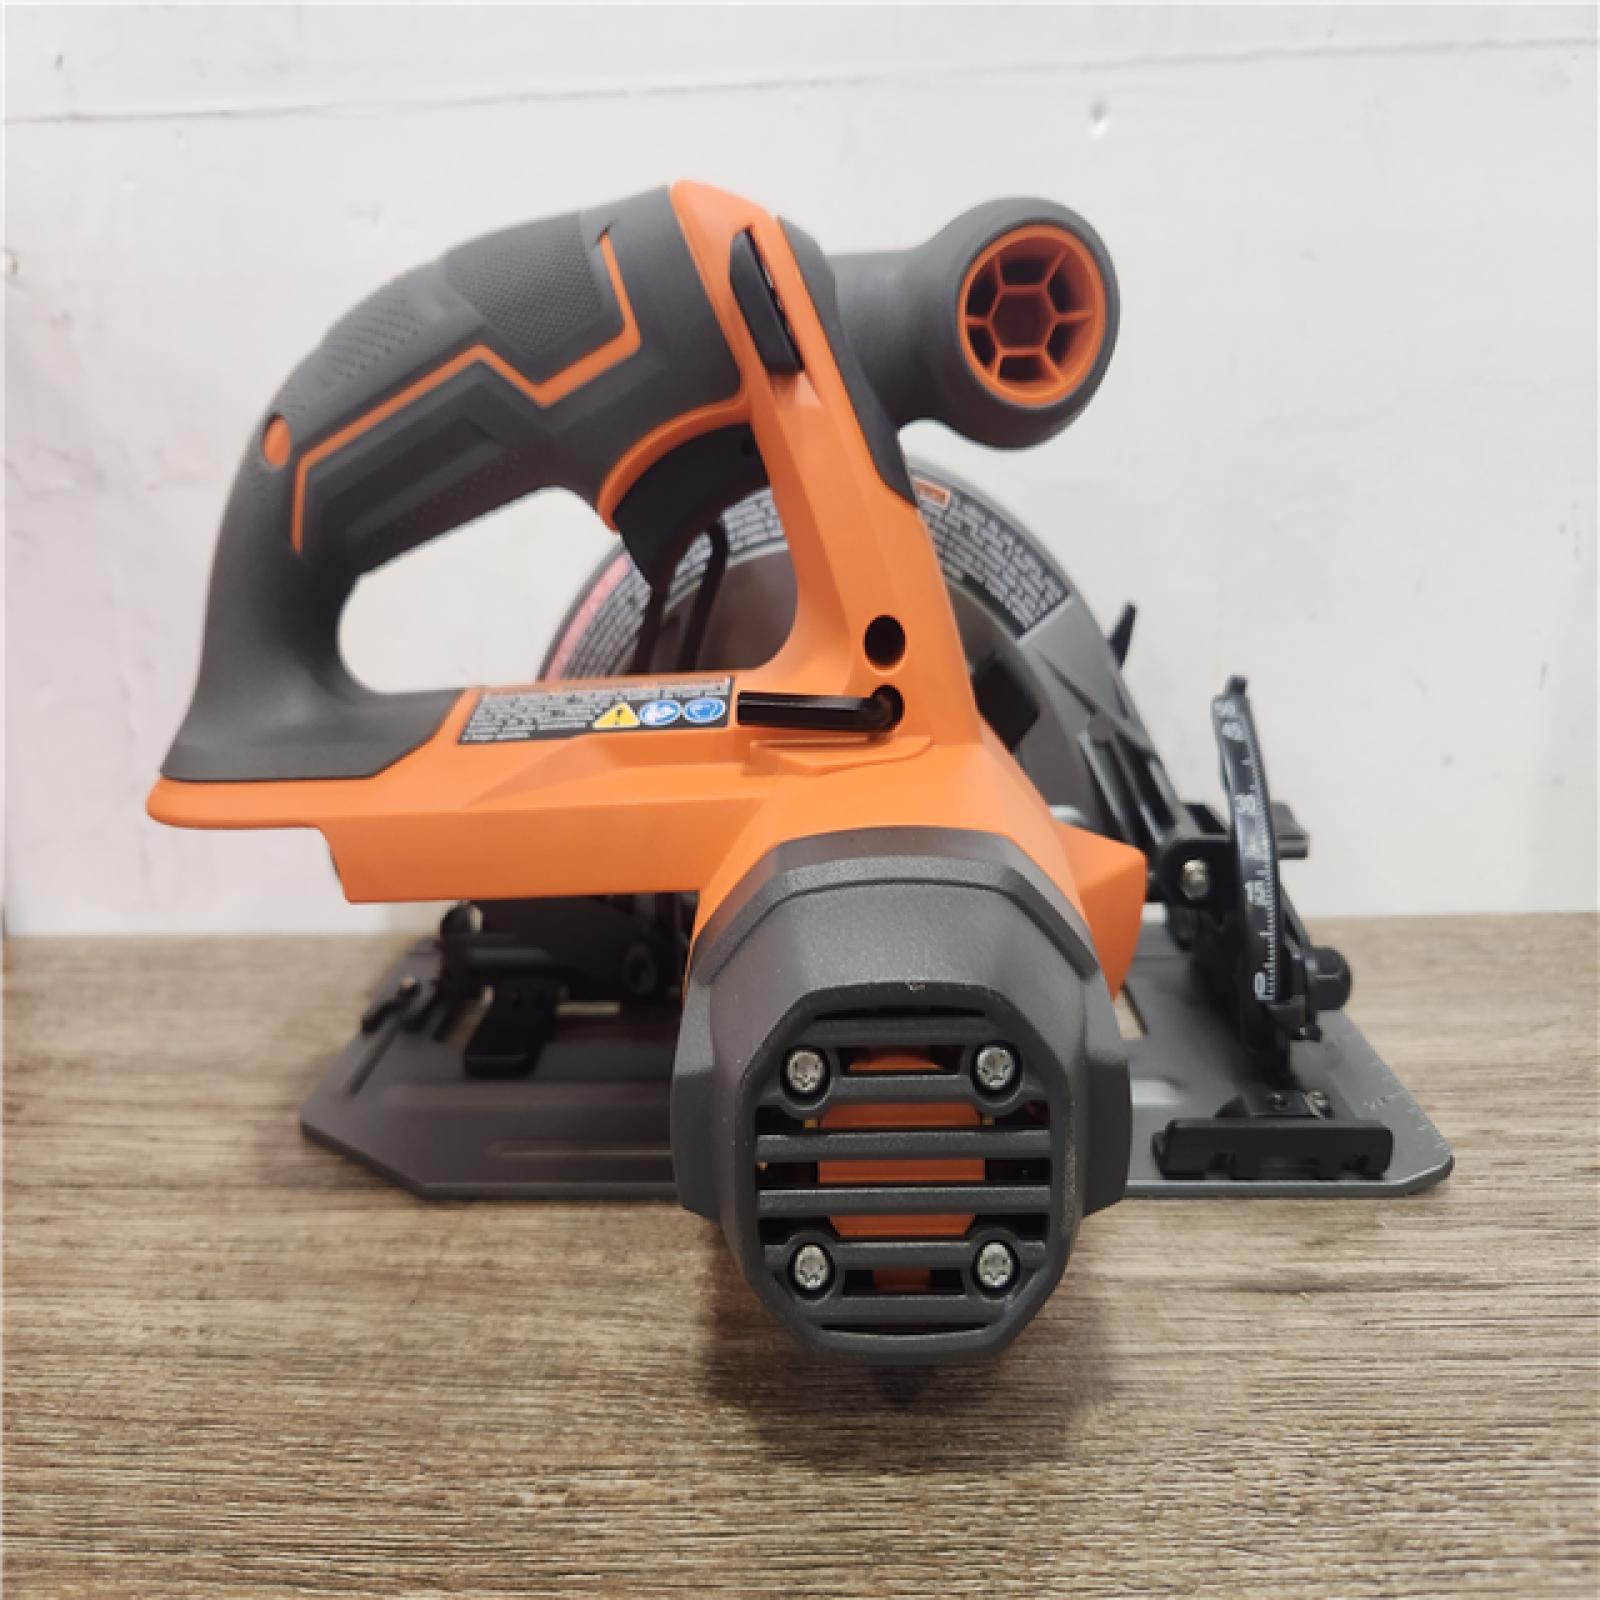 Phoenix Location NEW RIDGID 18V Cordless 1/2 in. Drill/Driver and 6-1/2 in. Circular Saw Combo Kit with 2.0 Ah and 4.0 Ah Battery, Charger, and Bag